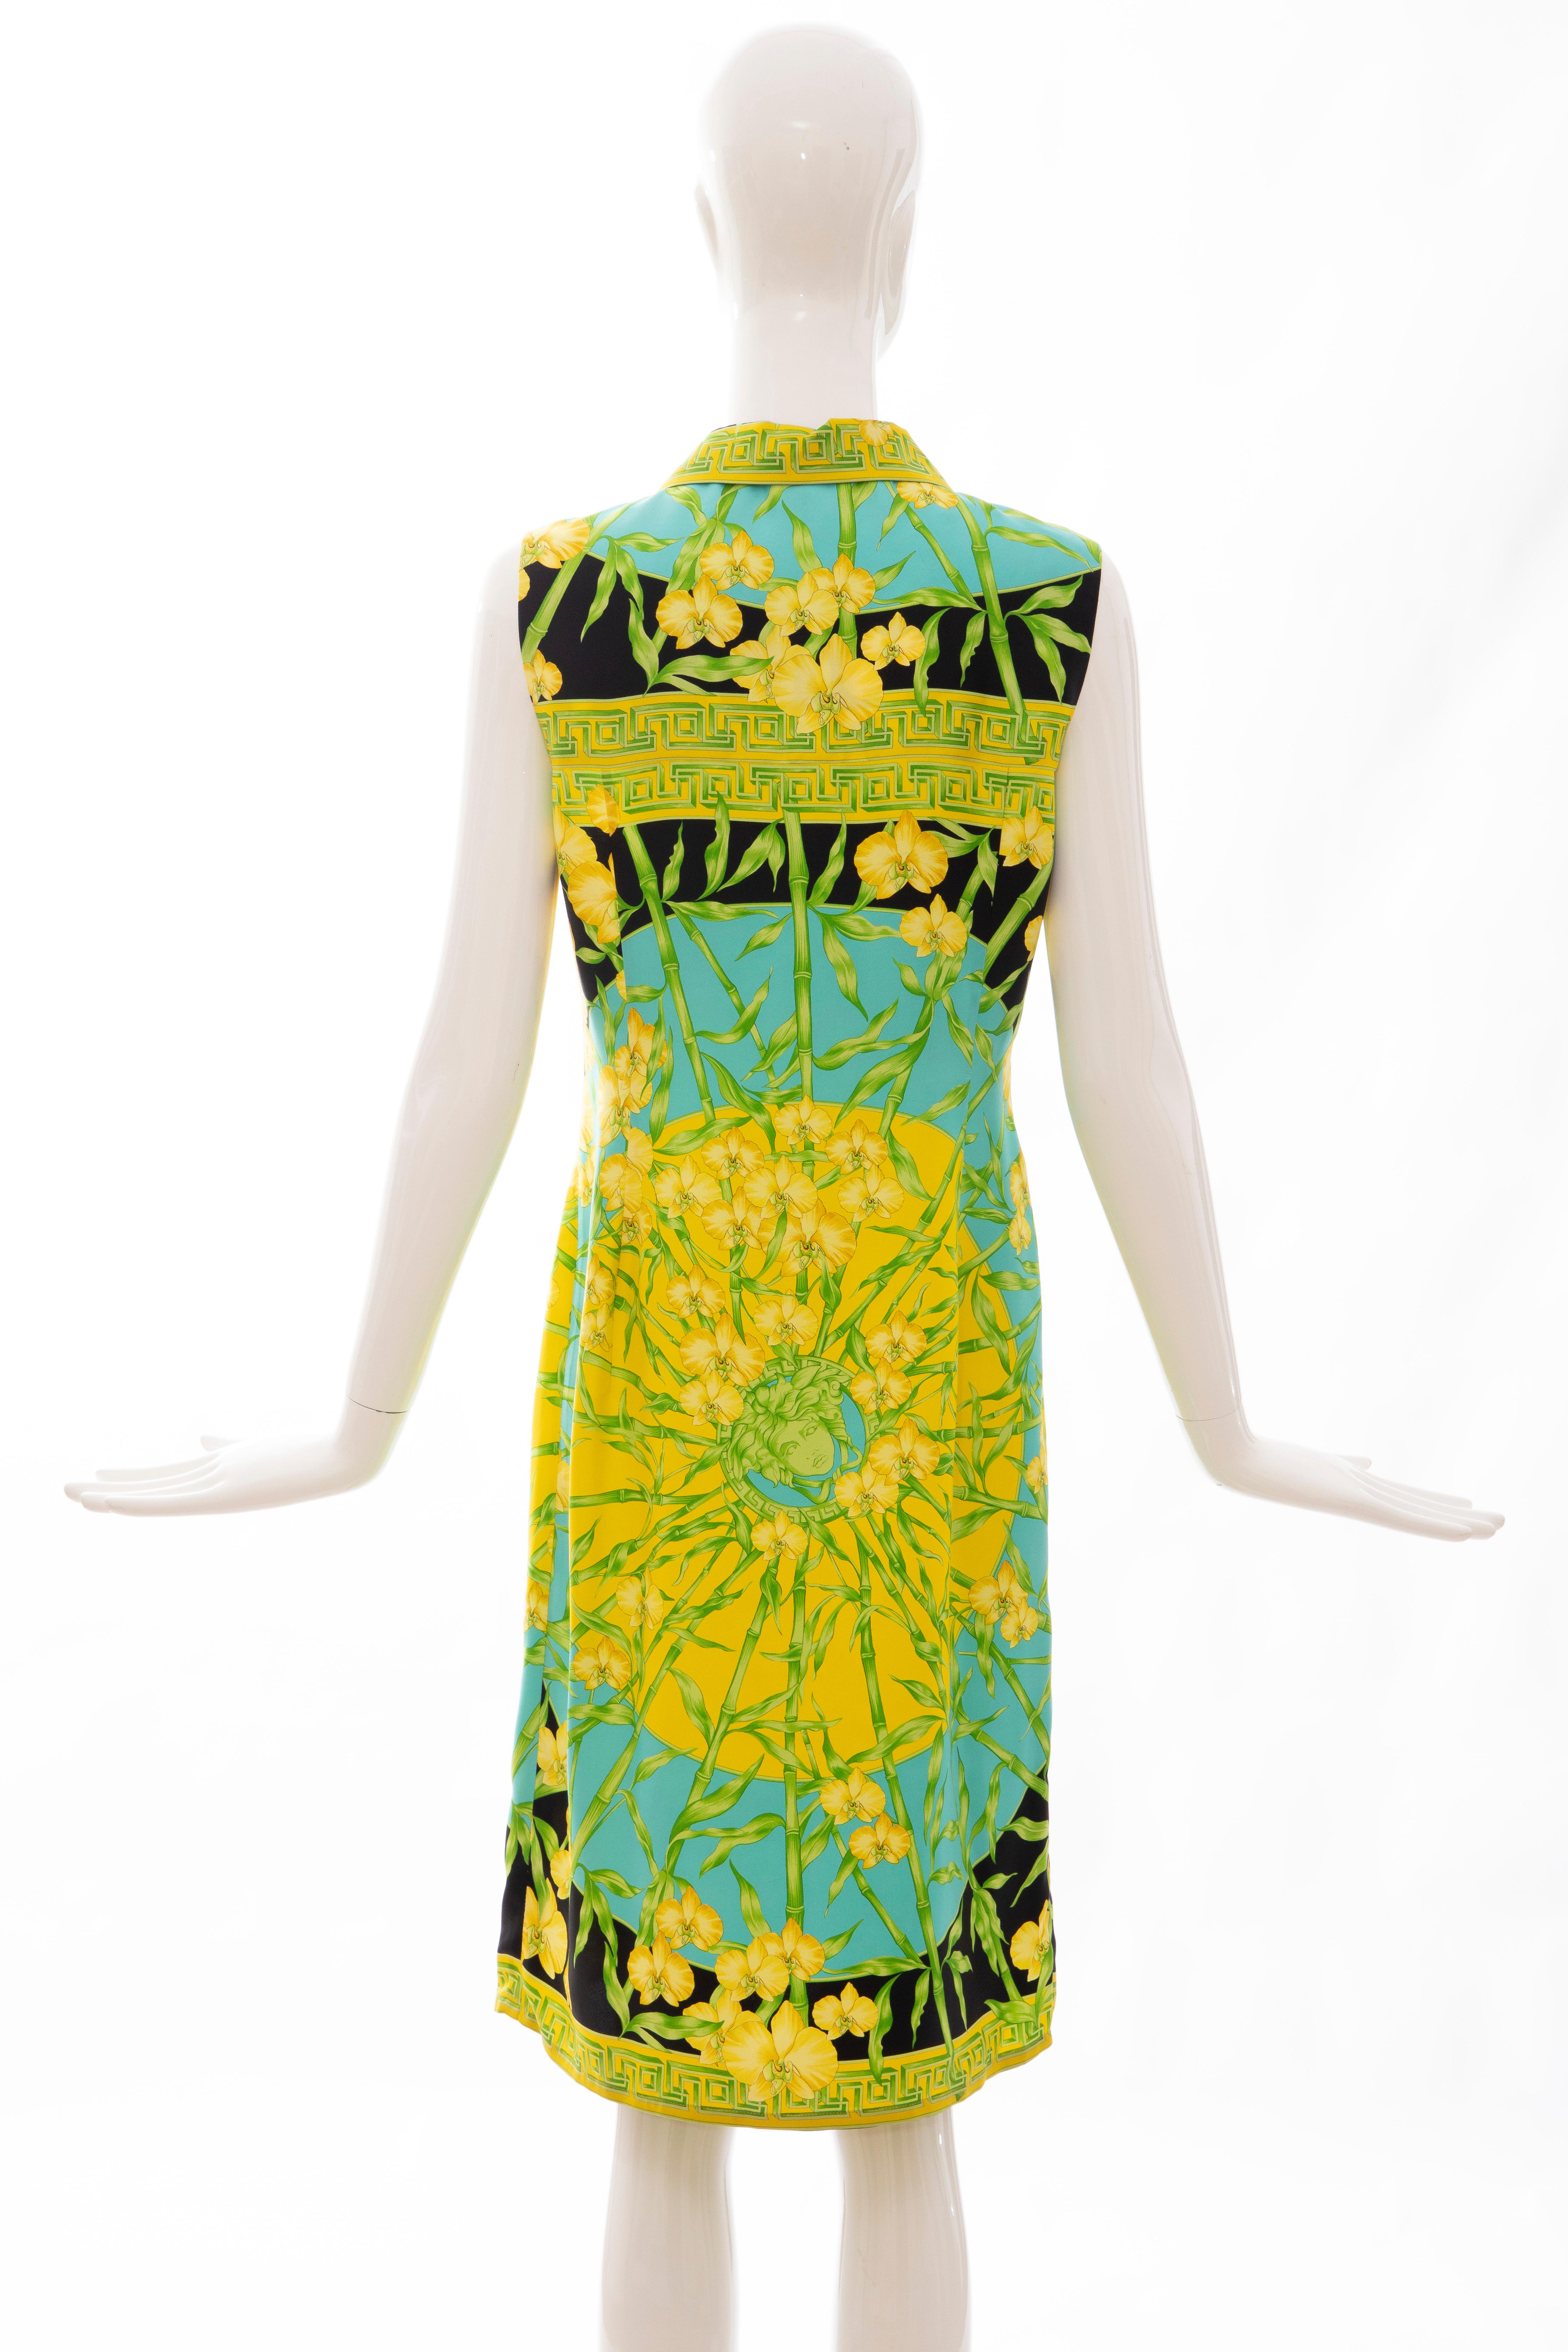 Gianni Versace Couture Silk Printed Yellow Orchids Sheath Dress, Circa: 1990's 2